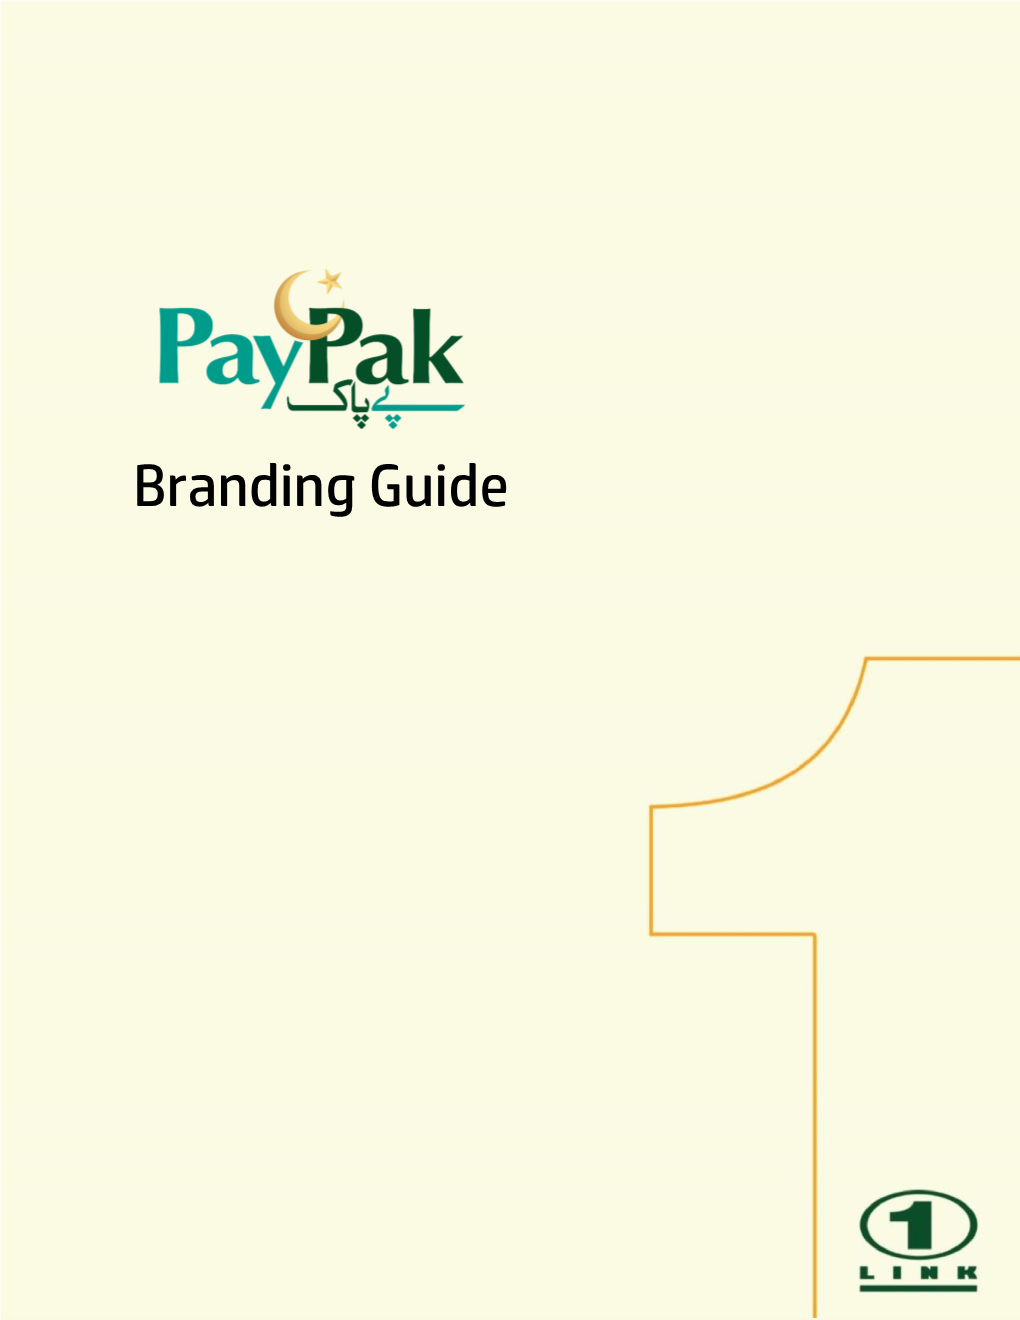 Paypak Branding Guidelines” Page 1 of 3 1LINK (Pvt) Limited